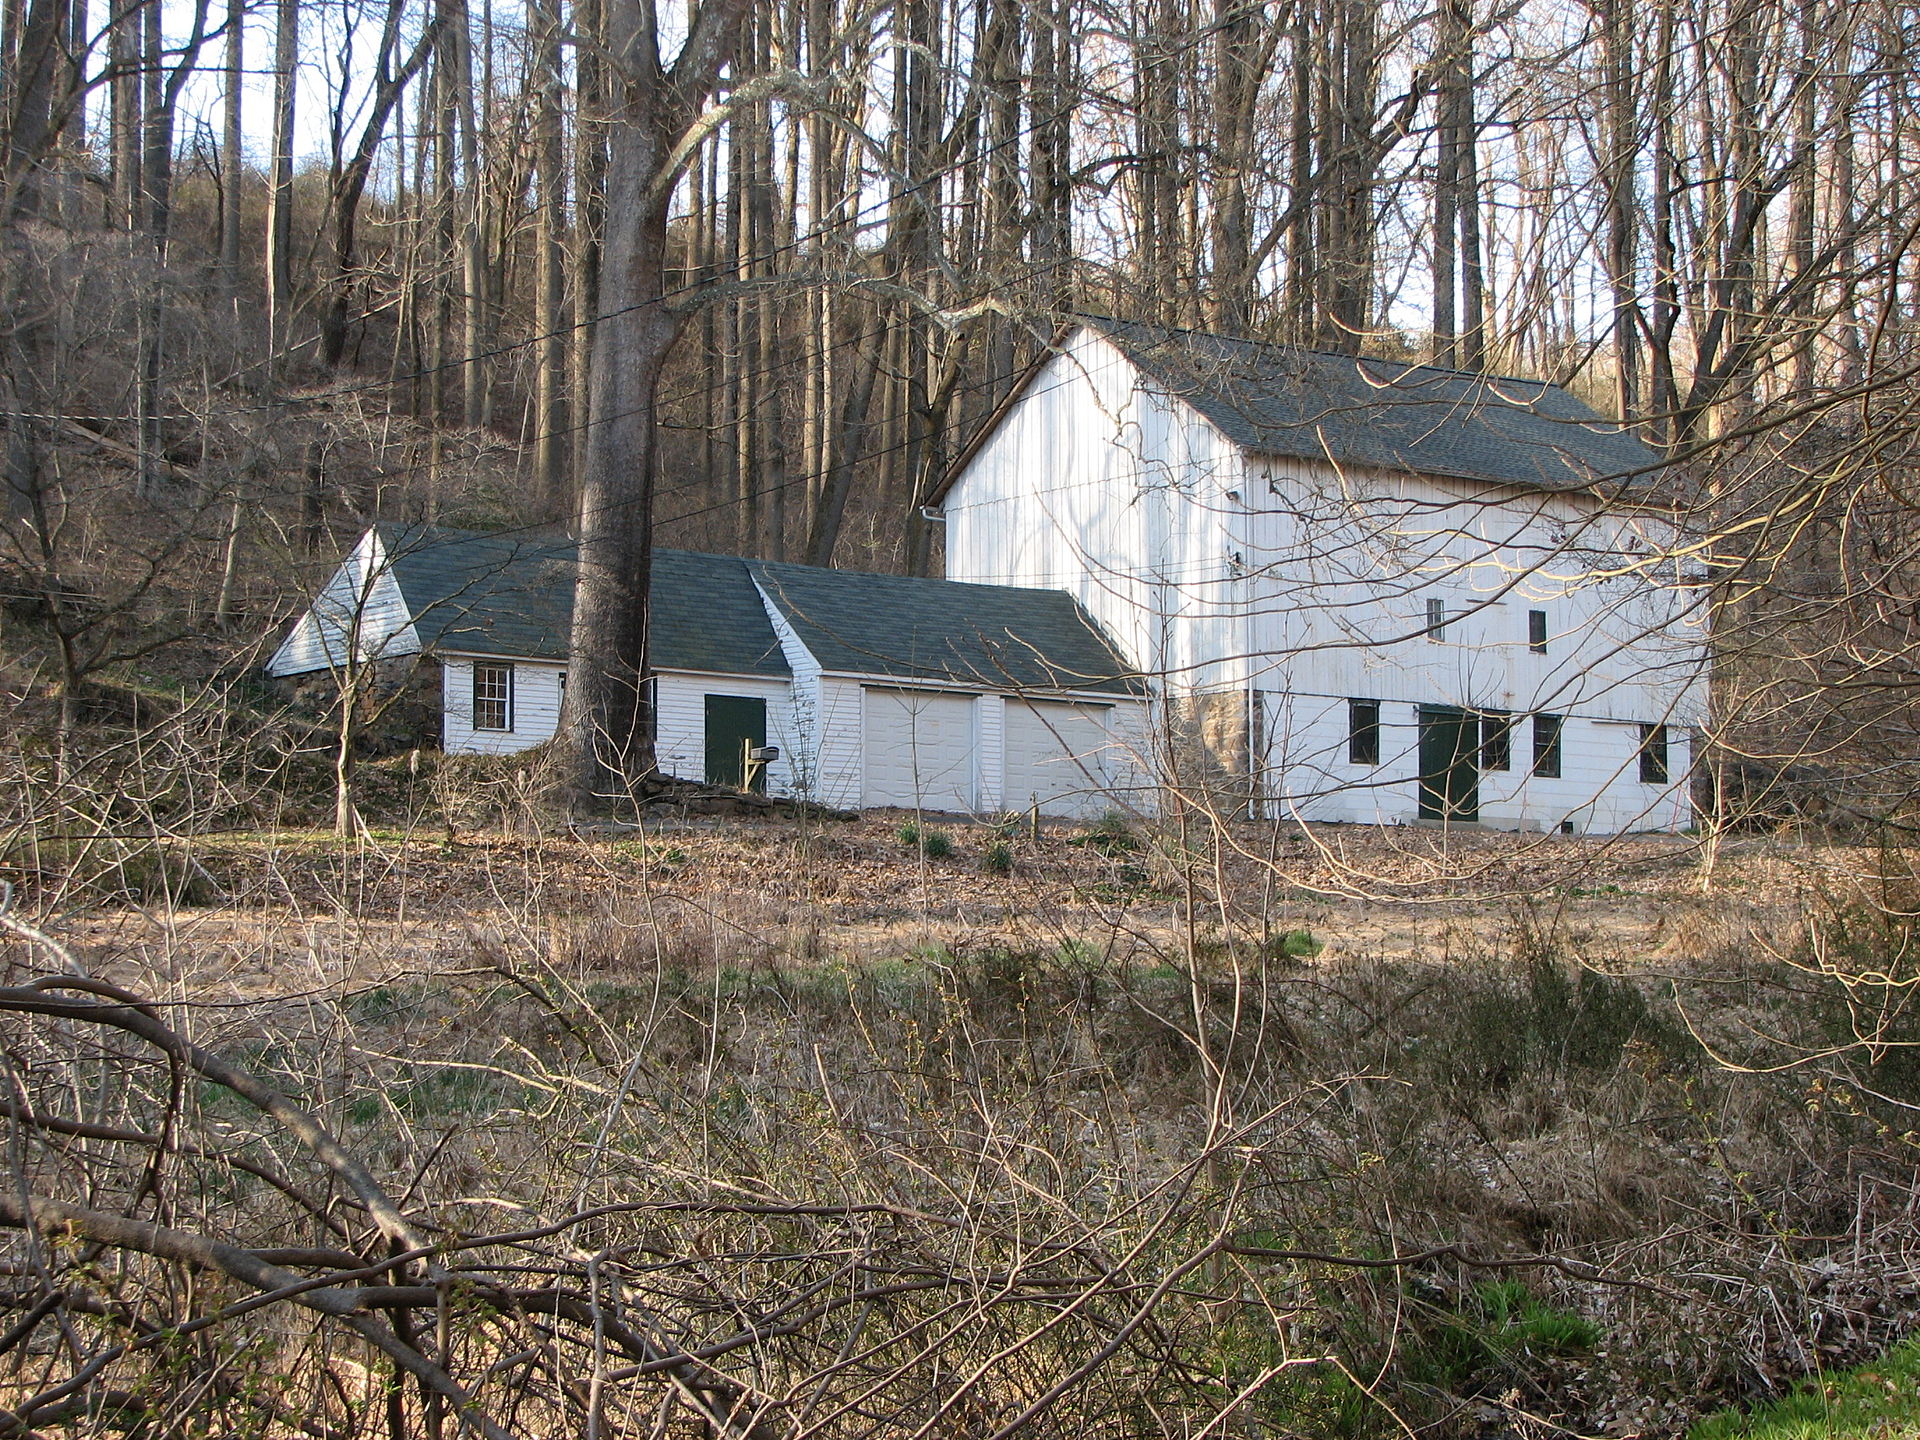 Barn at the historic John Carney Agricultural Complex at Greenville, New Castle County, Delaware. The building is listed on the National Register of Historic Places. Image by Choess.